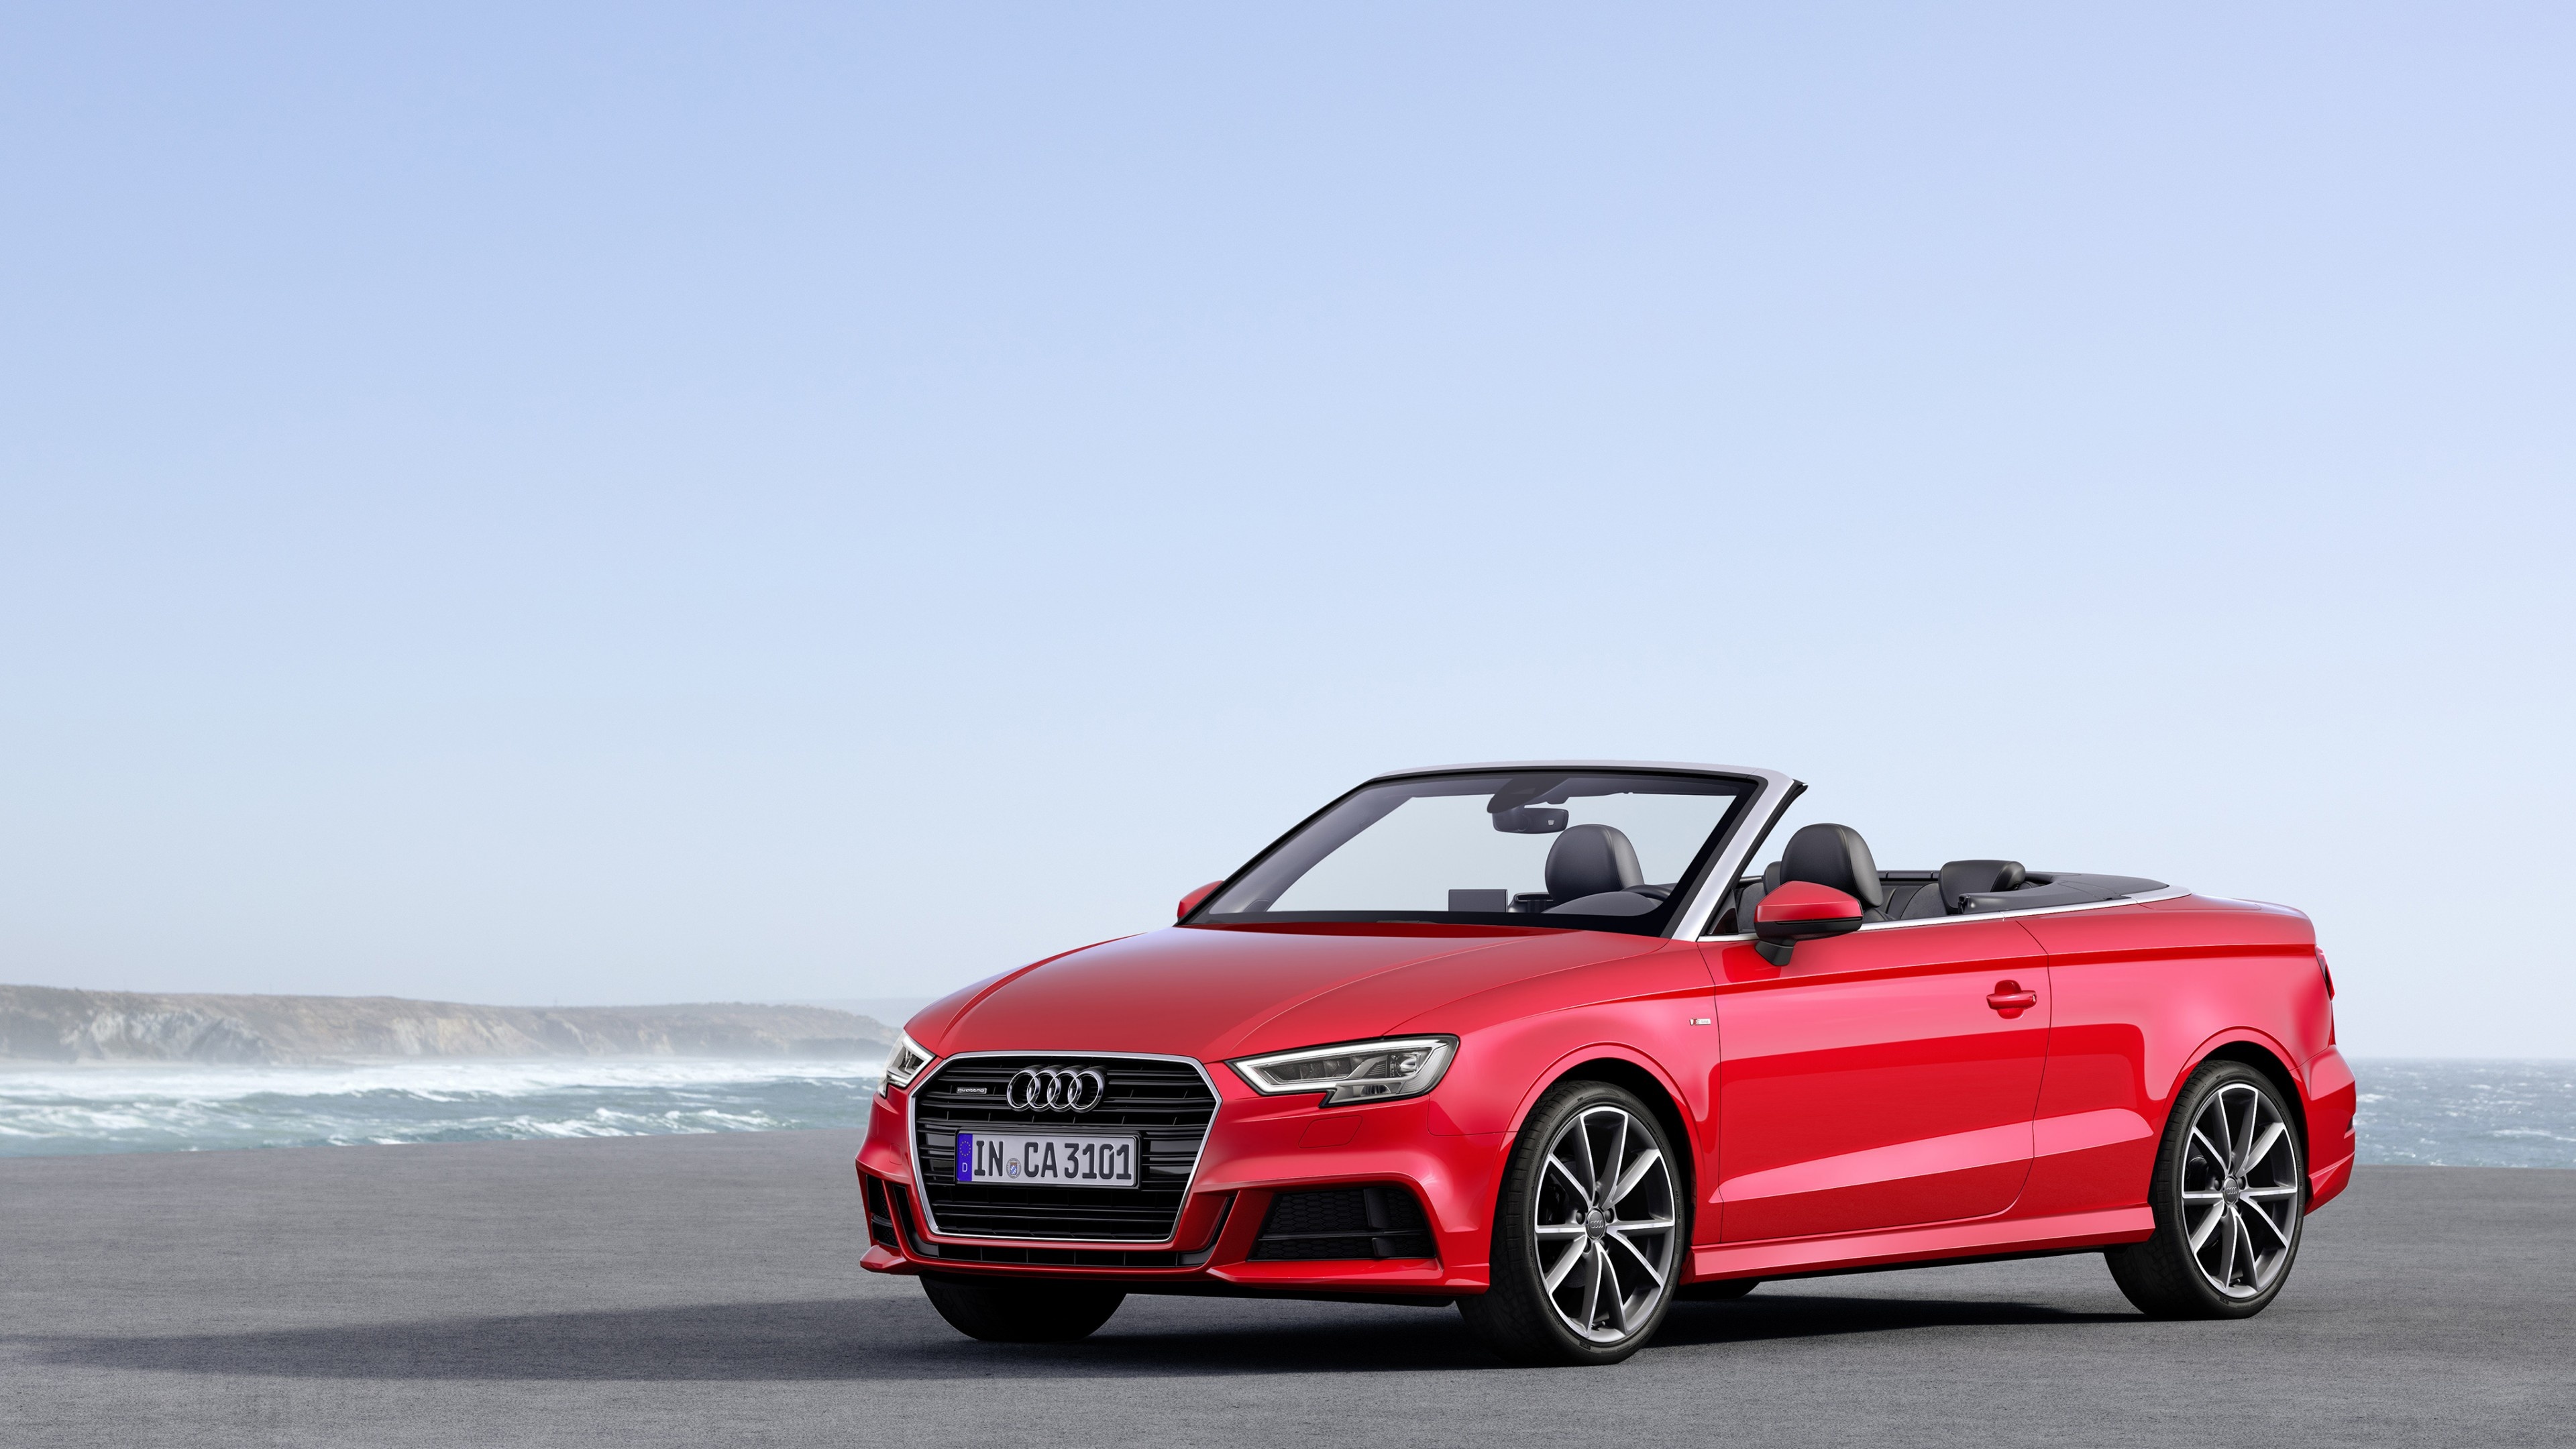 Audi A3 Cabriolet, Convertible beauty, Eye-catching red exterior, Superior performance, 3840x2160 4K Desktop